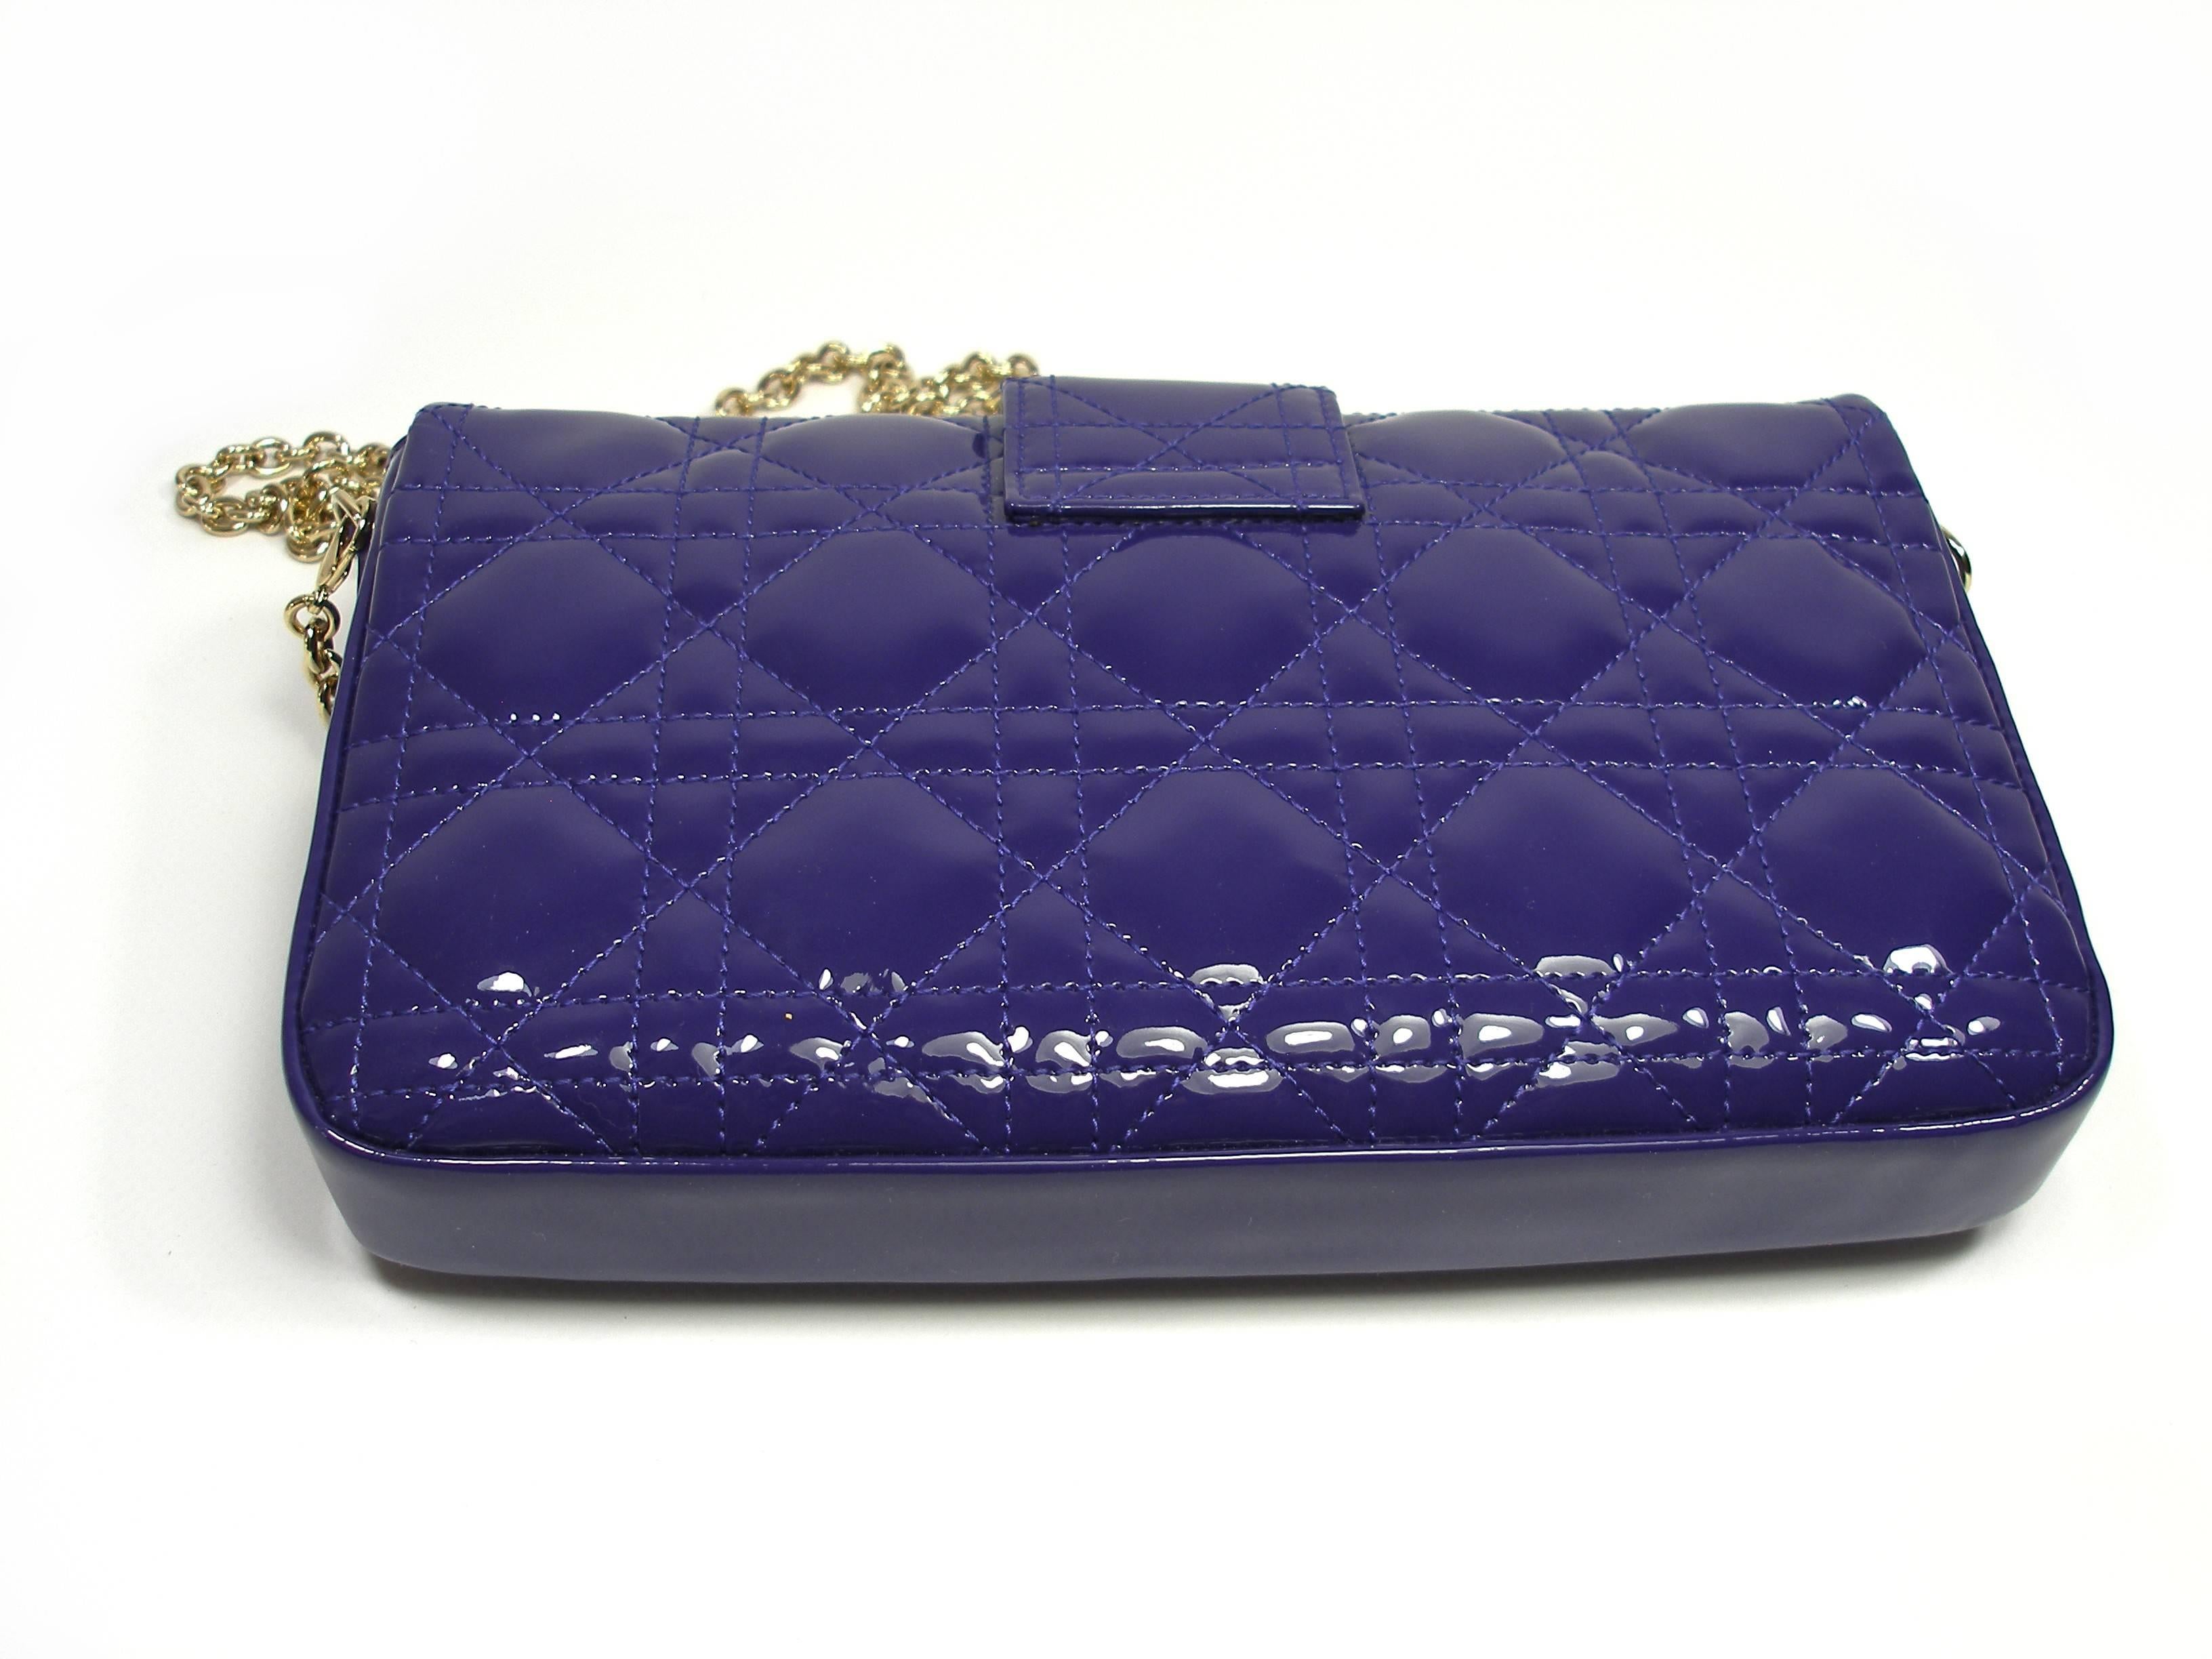 Women's DIOR NEW LOCK Pouch in Violet patent leather and gold Hadware / BRAND NEW 